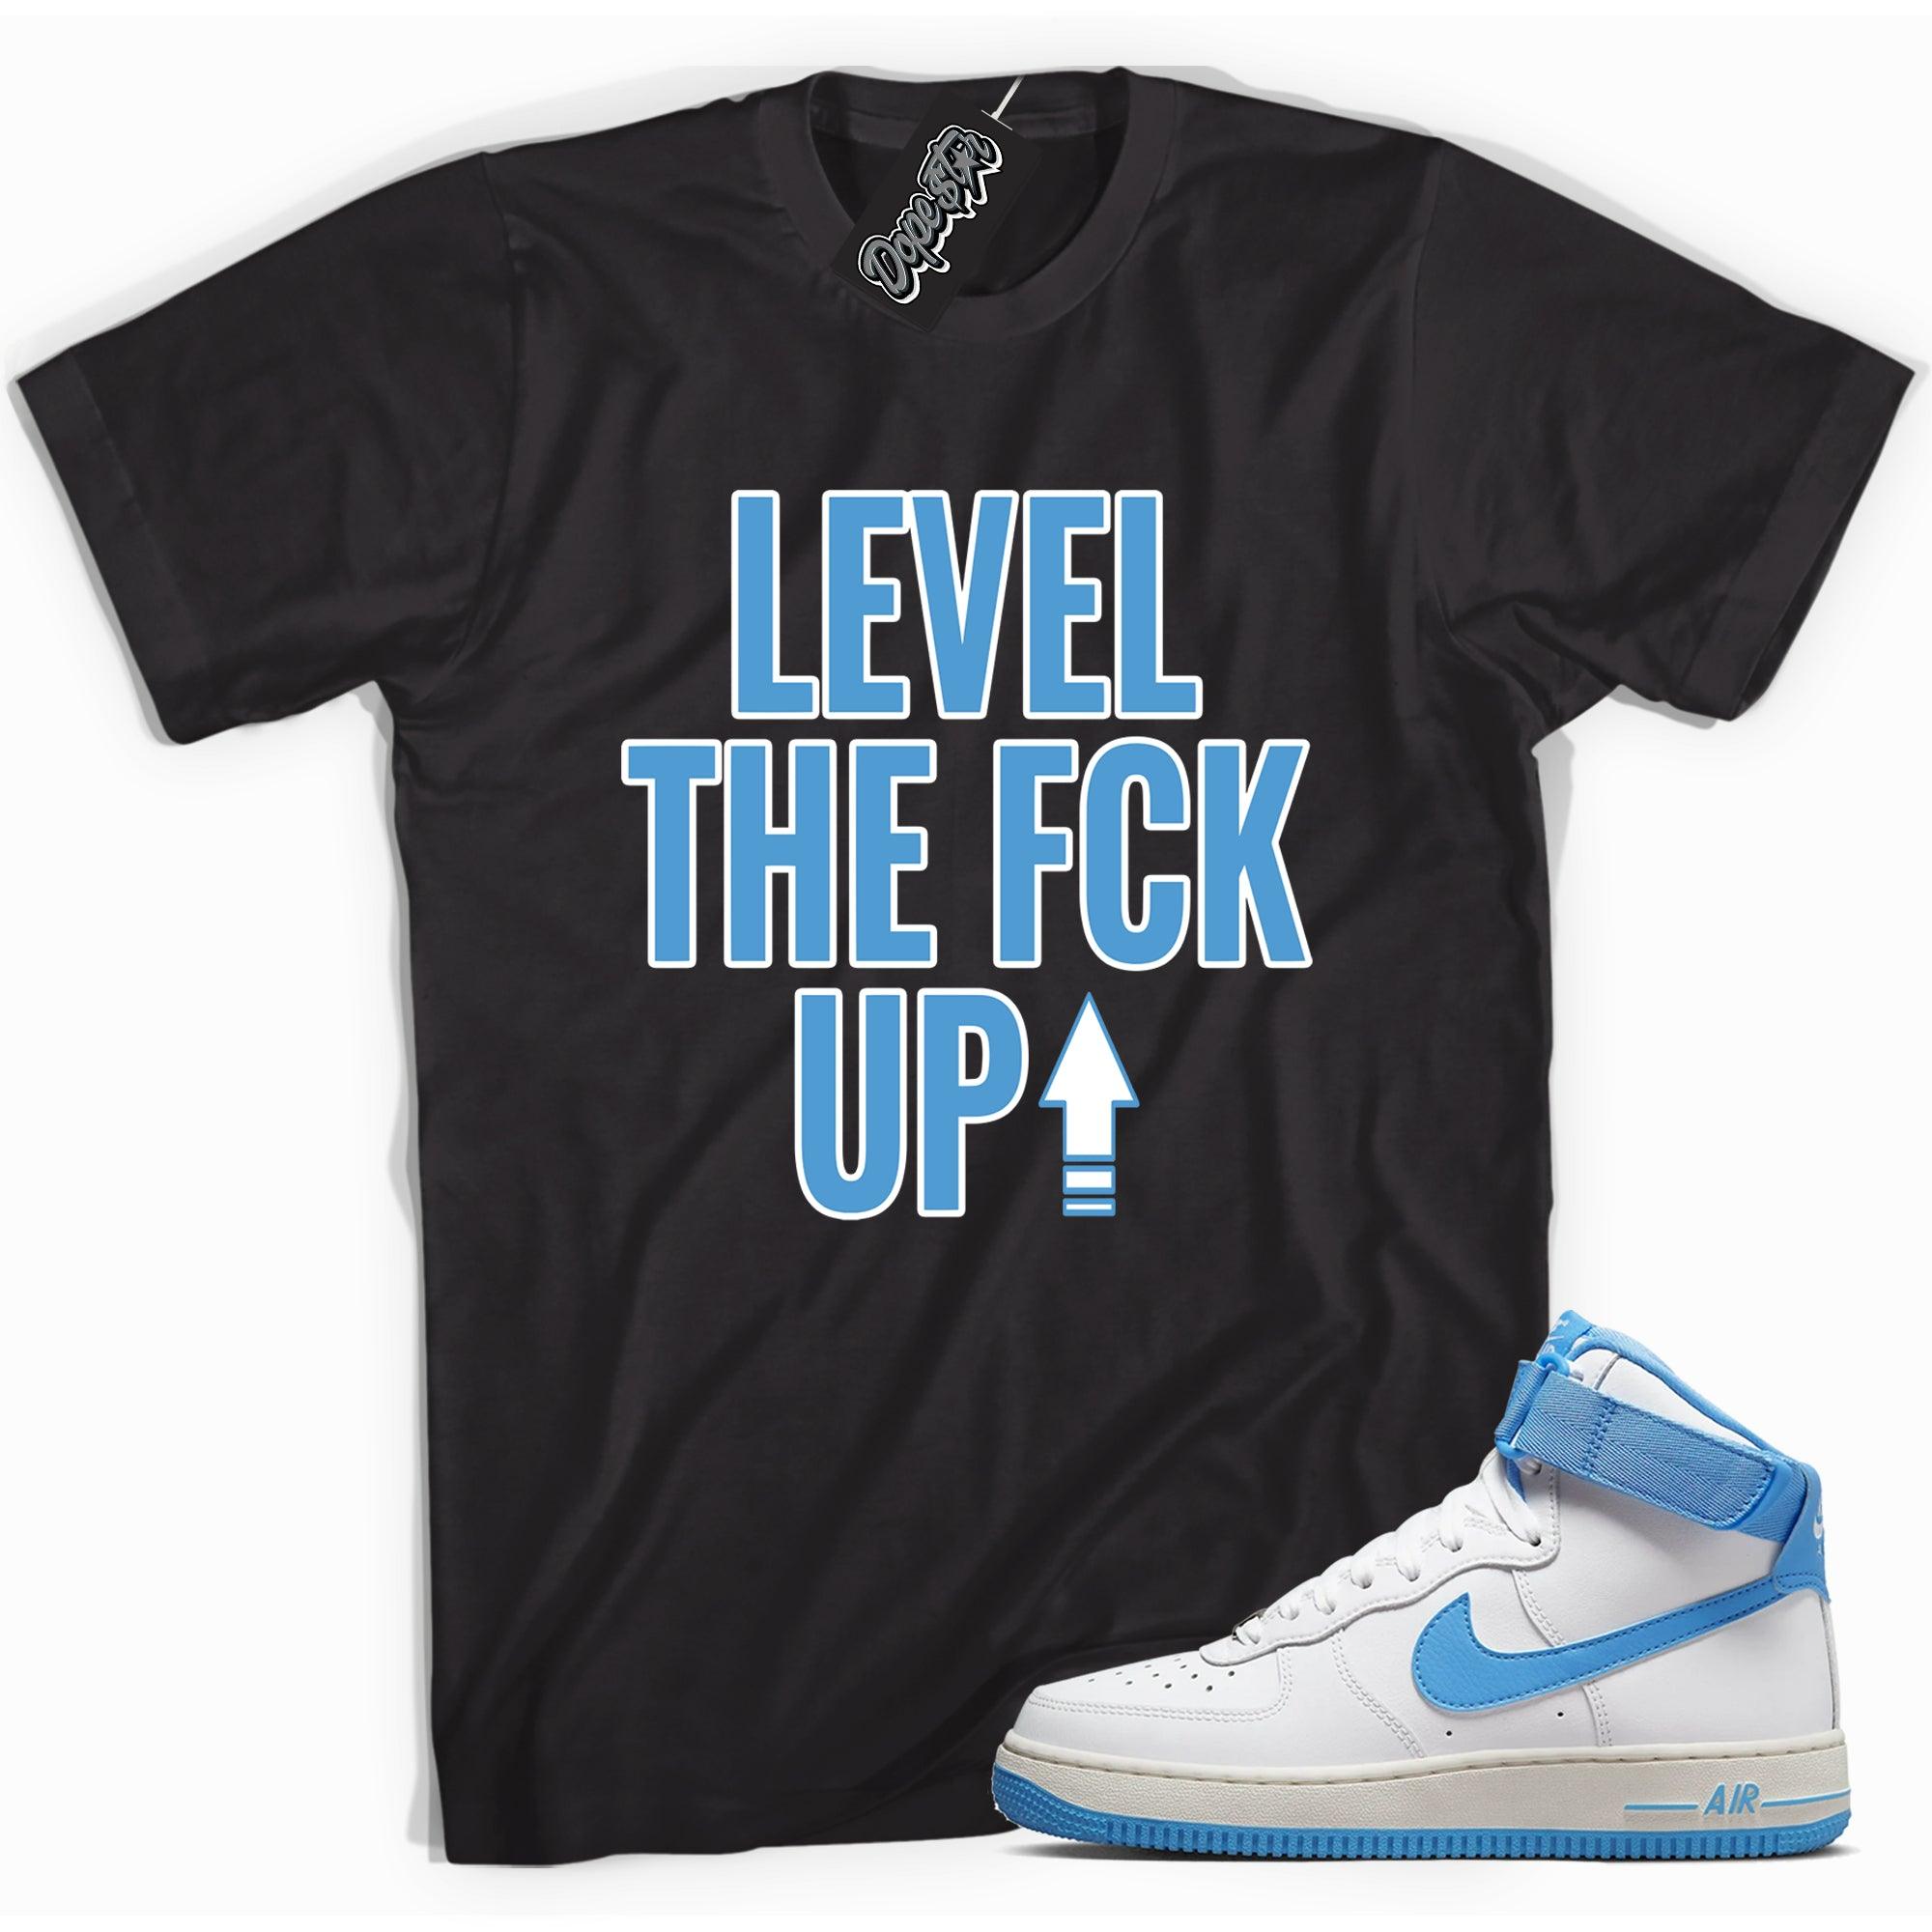 Cool black graphic tee with 'Level Up' print, that perfectly matches NIKE Air force 1 High White University Blue sneakers.